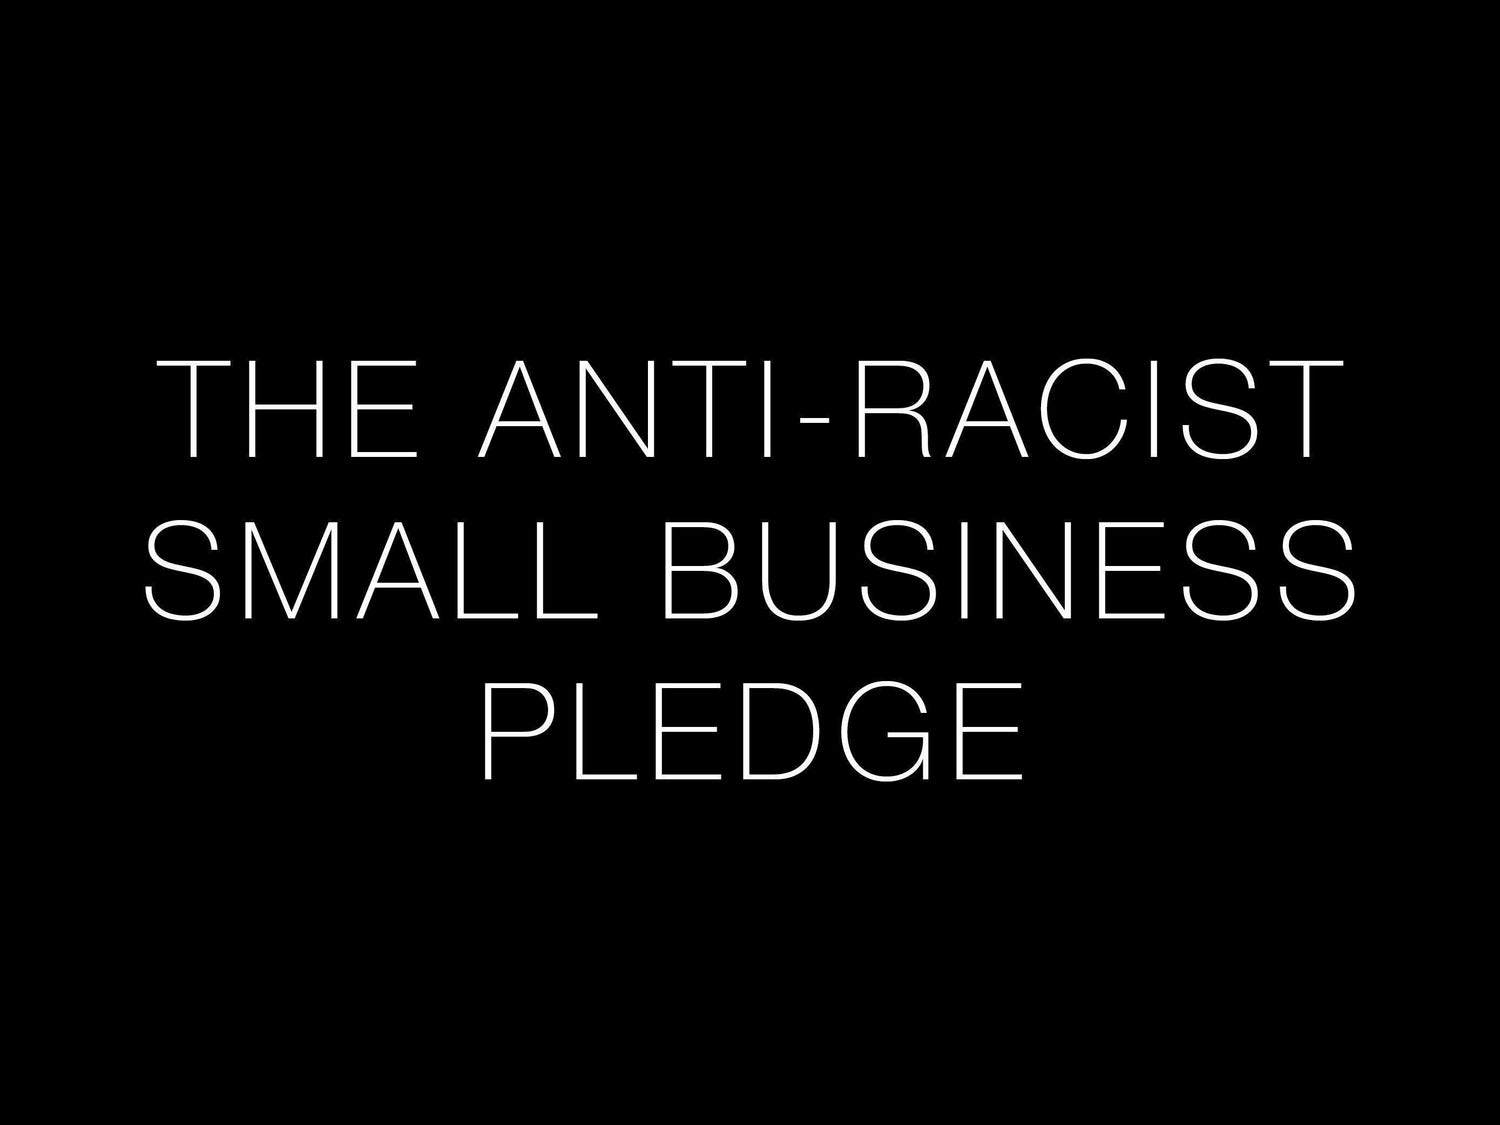 How the Twyla Dill Team Is Committed to Becoming An Anti-Racist Business-Seattle Jewelry-Handmade Jewelry-Seattle Jeweler-Twyla Dill